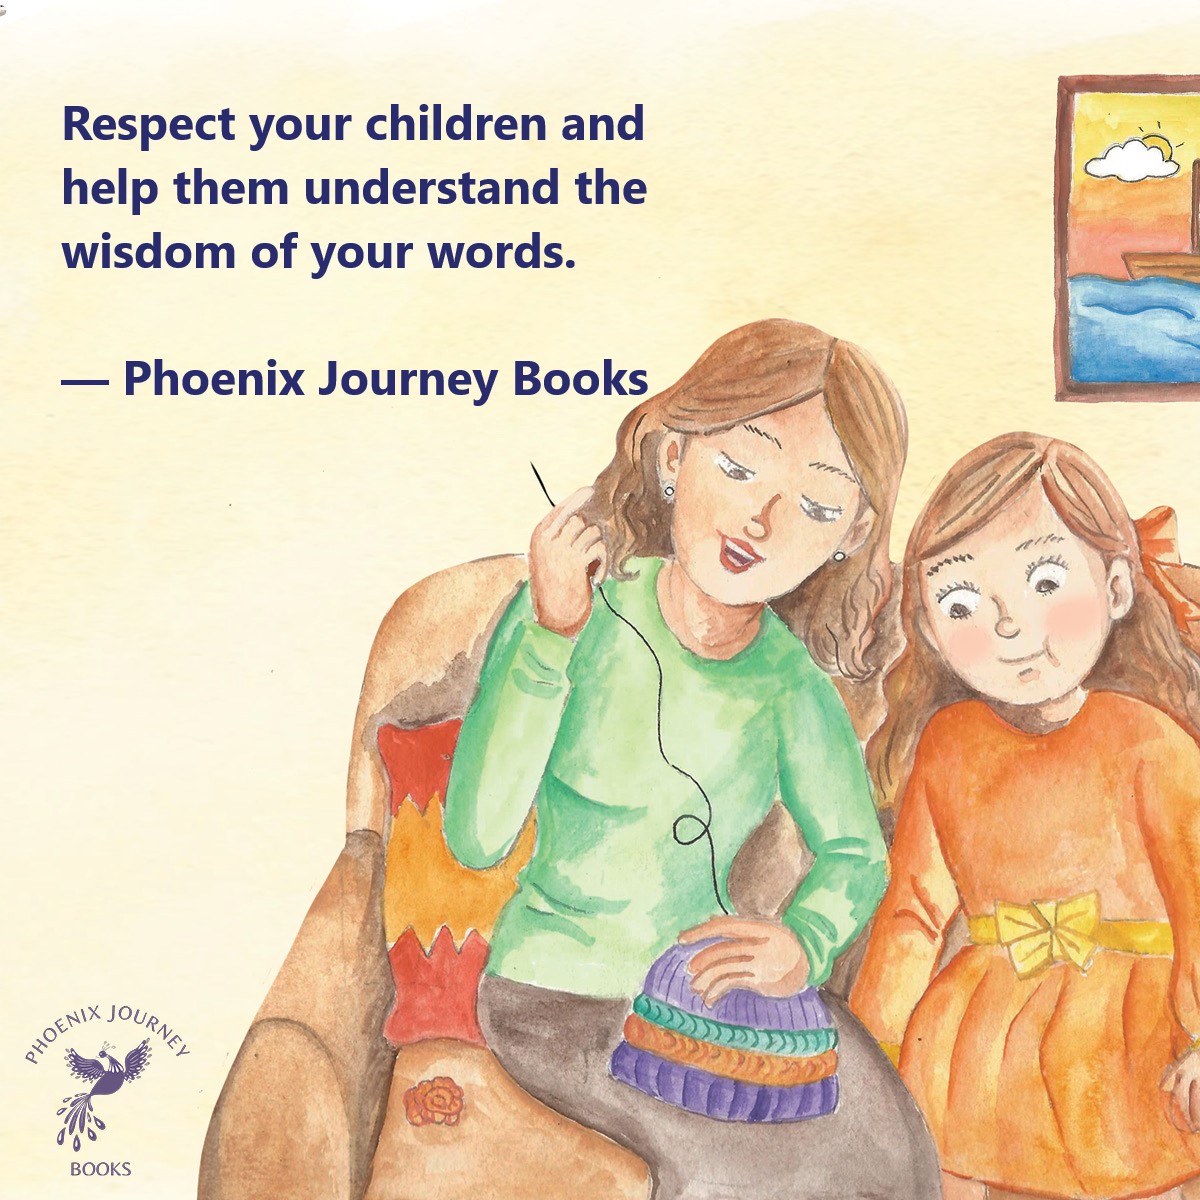 Respect and wisdom are some of the most valuable lessons we can teach to a child.

#Wisdomquotes #Educationquotes #Picturebooks #KnittingBooks